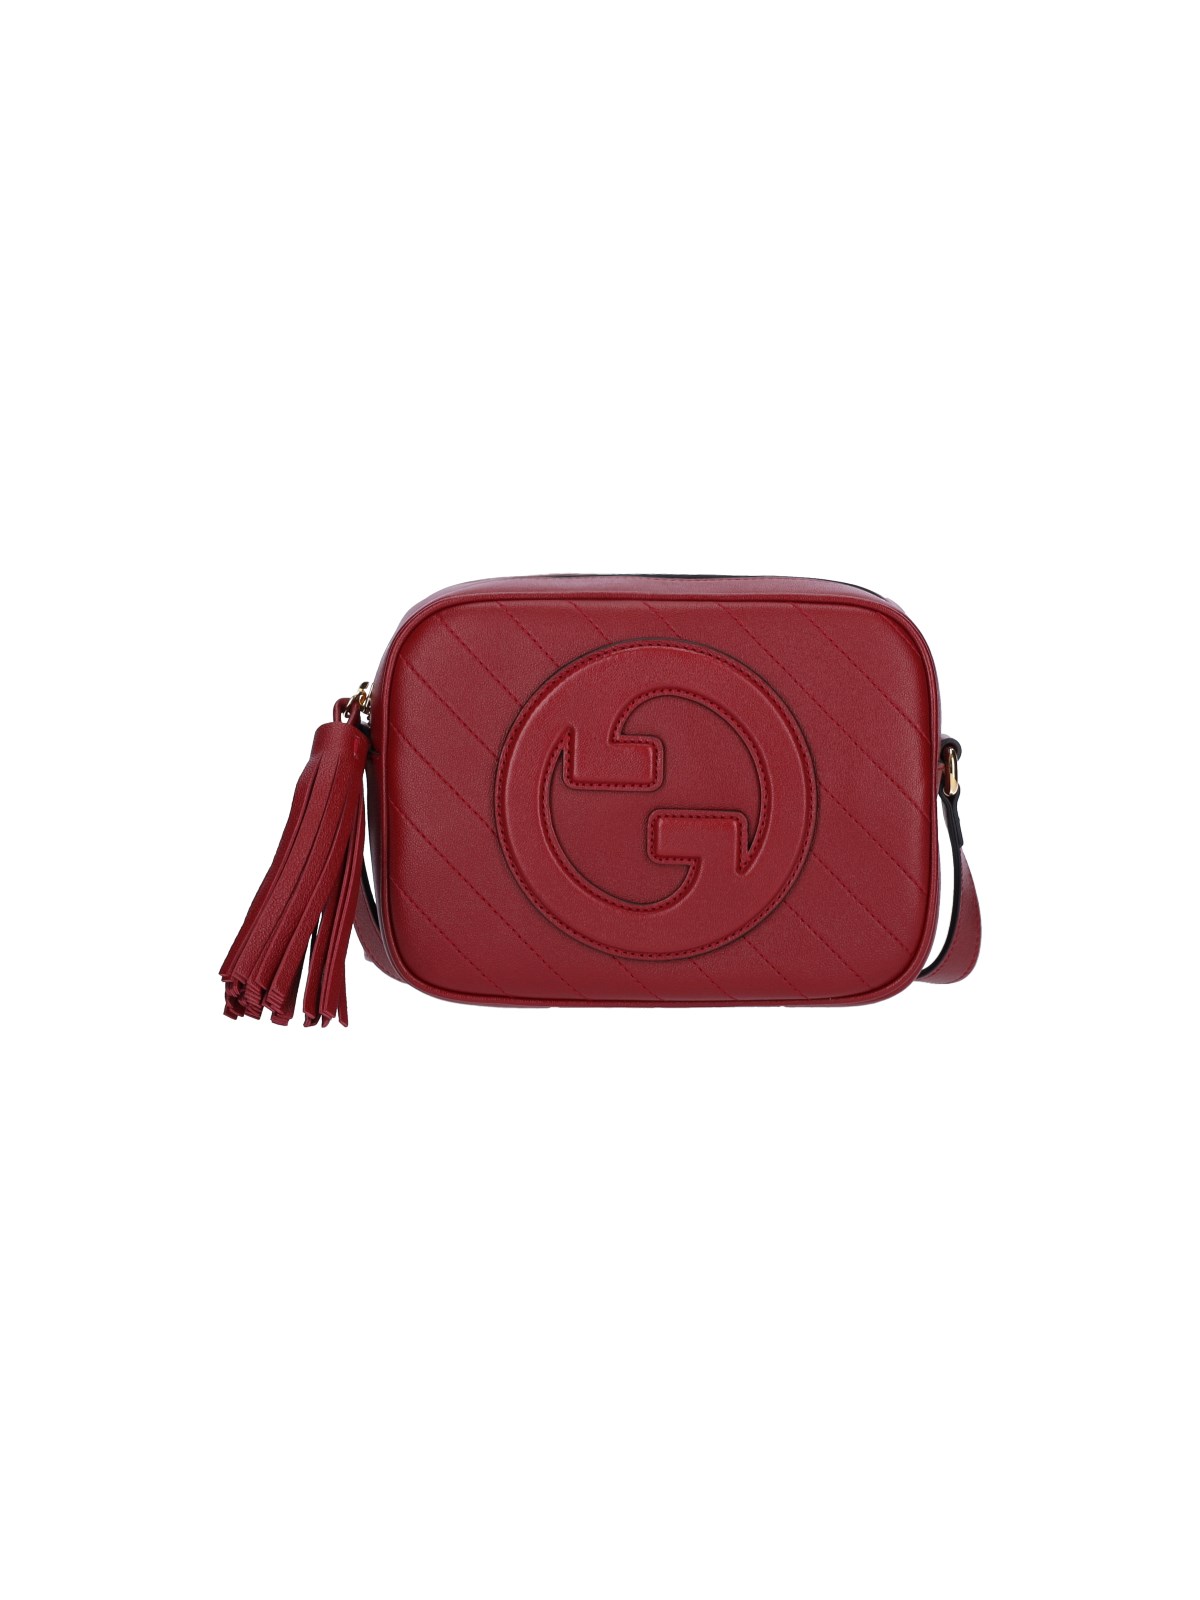 Gucci Blondie Small Bag In Red